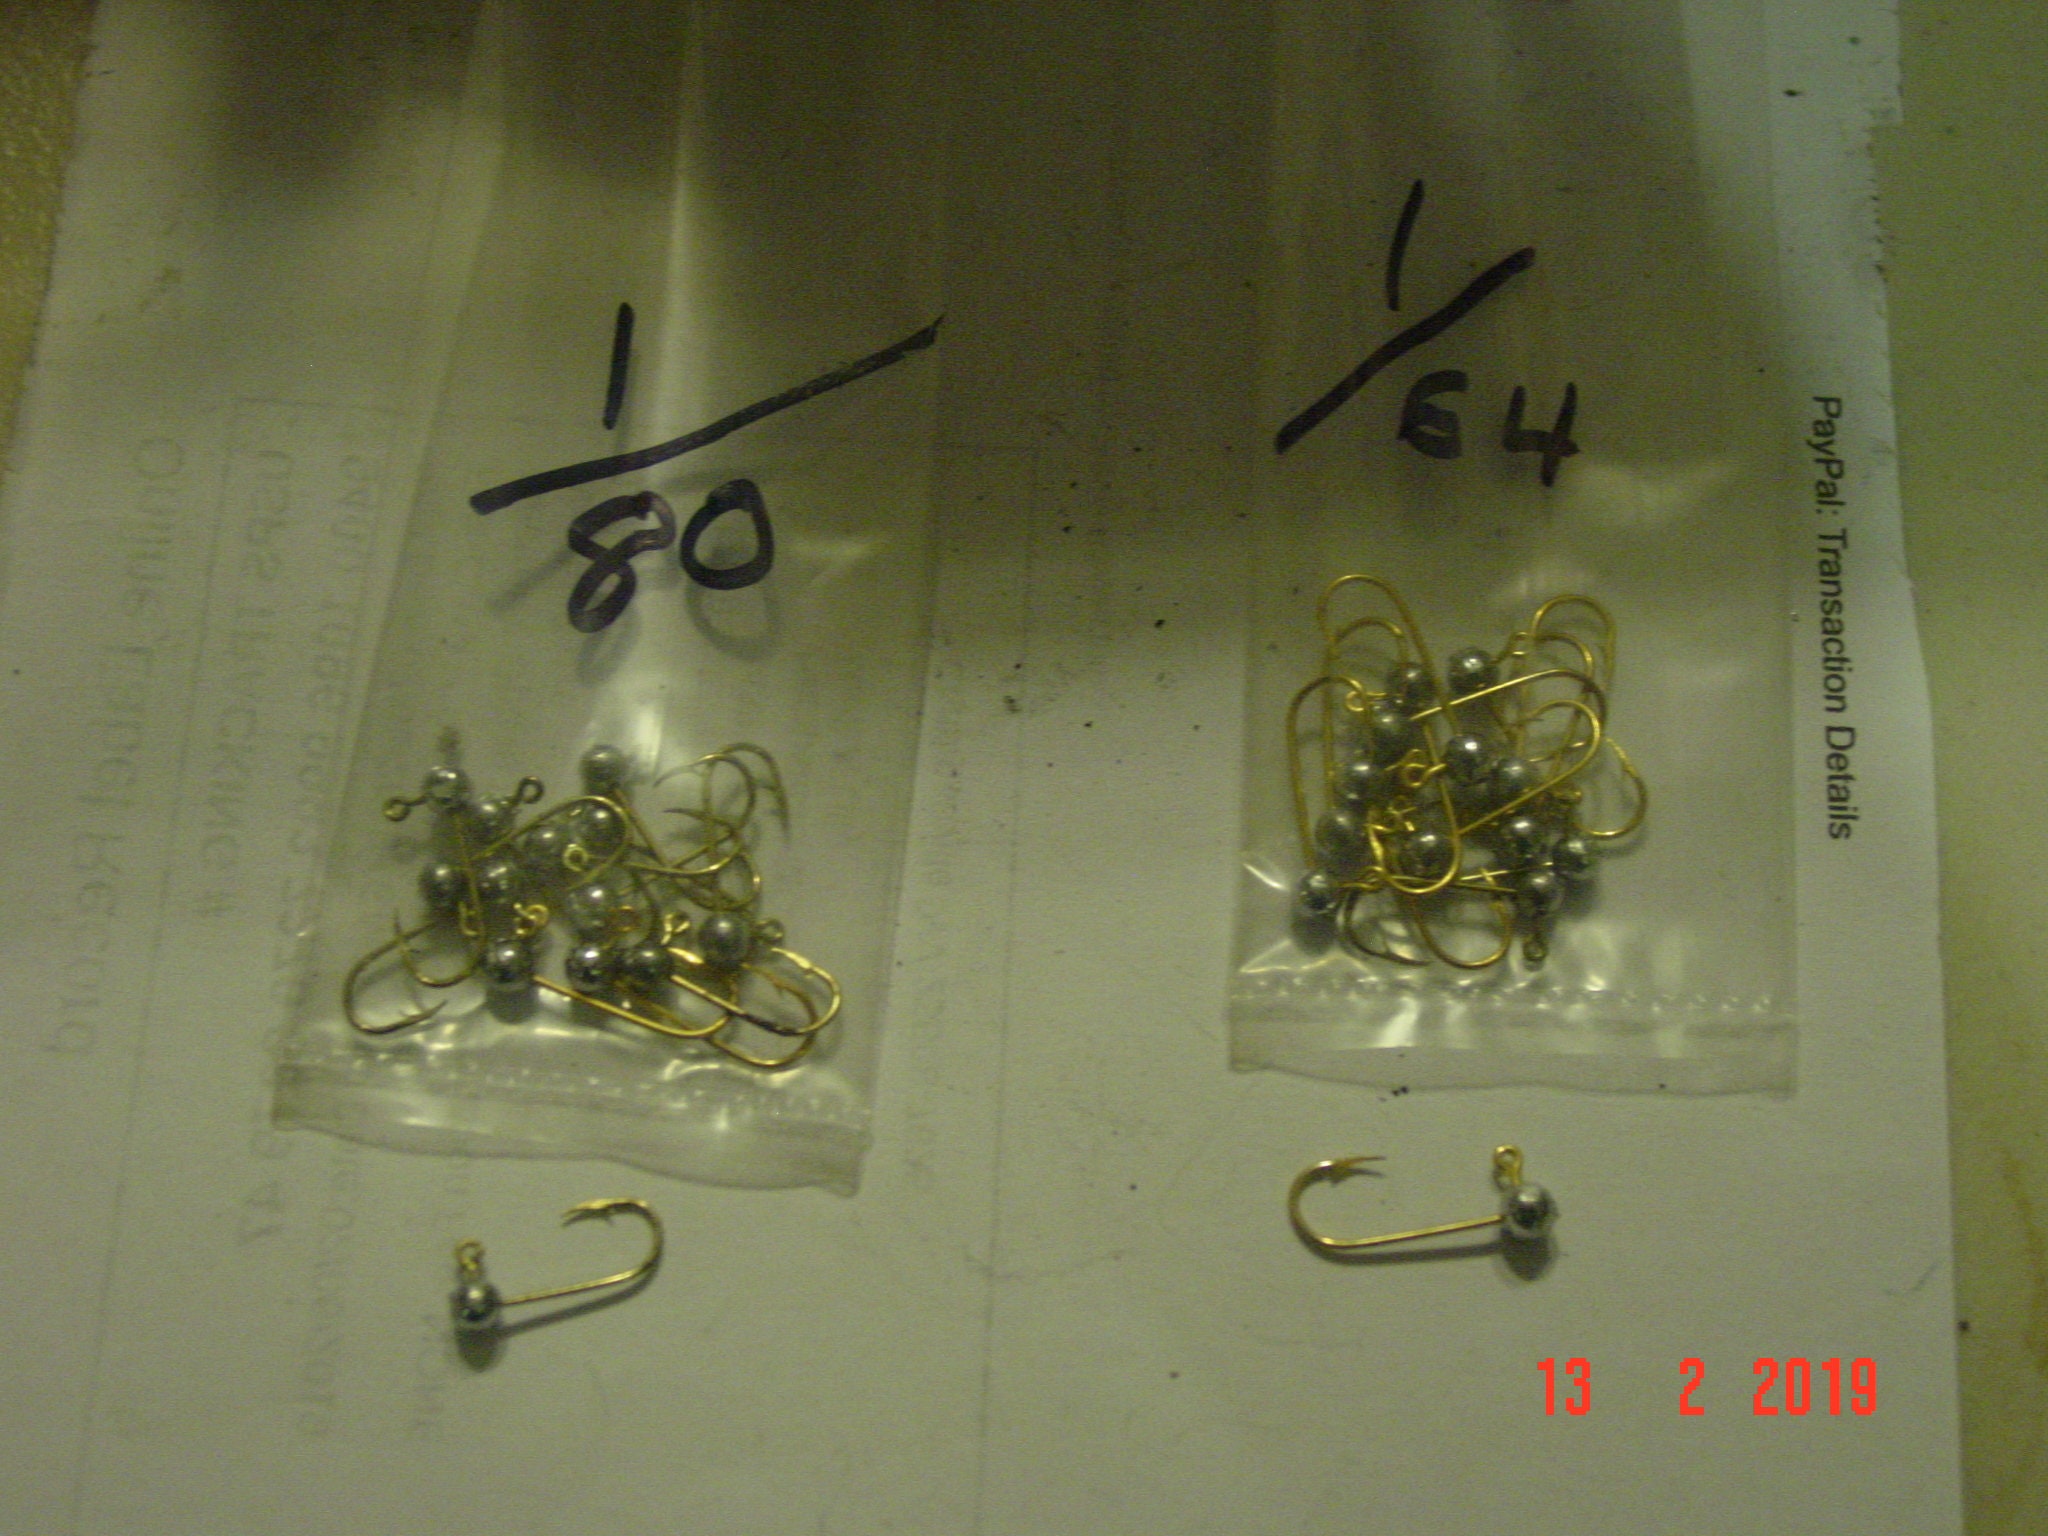 12 Pack 1/80,1/64,1/32,1/16,1/8,oz Jig Heads No Collar 575 Eagle Claw Hooks  -  Canada